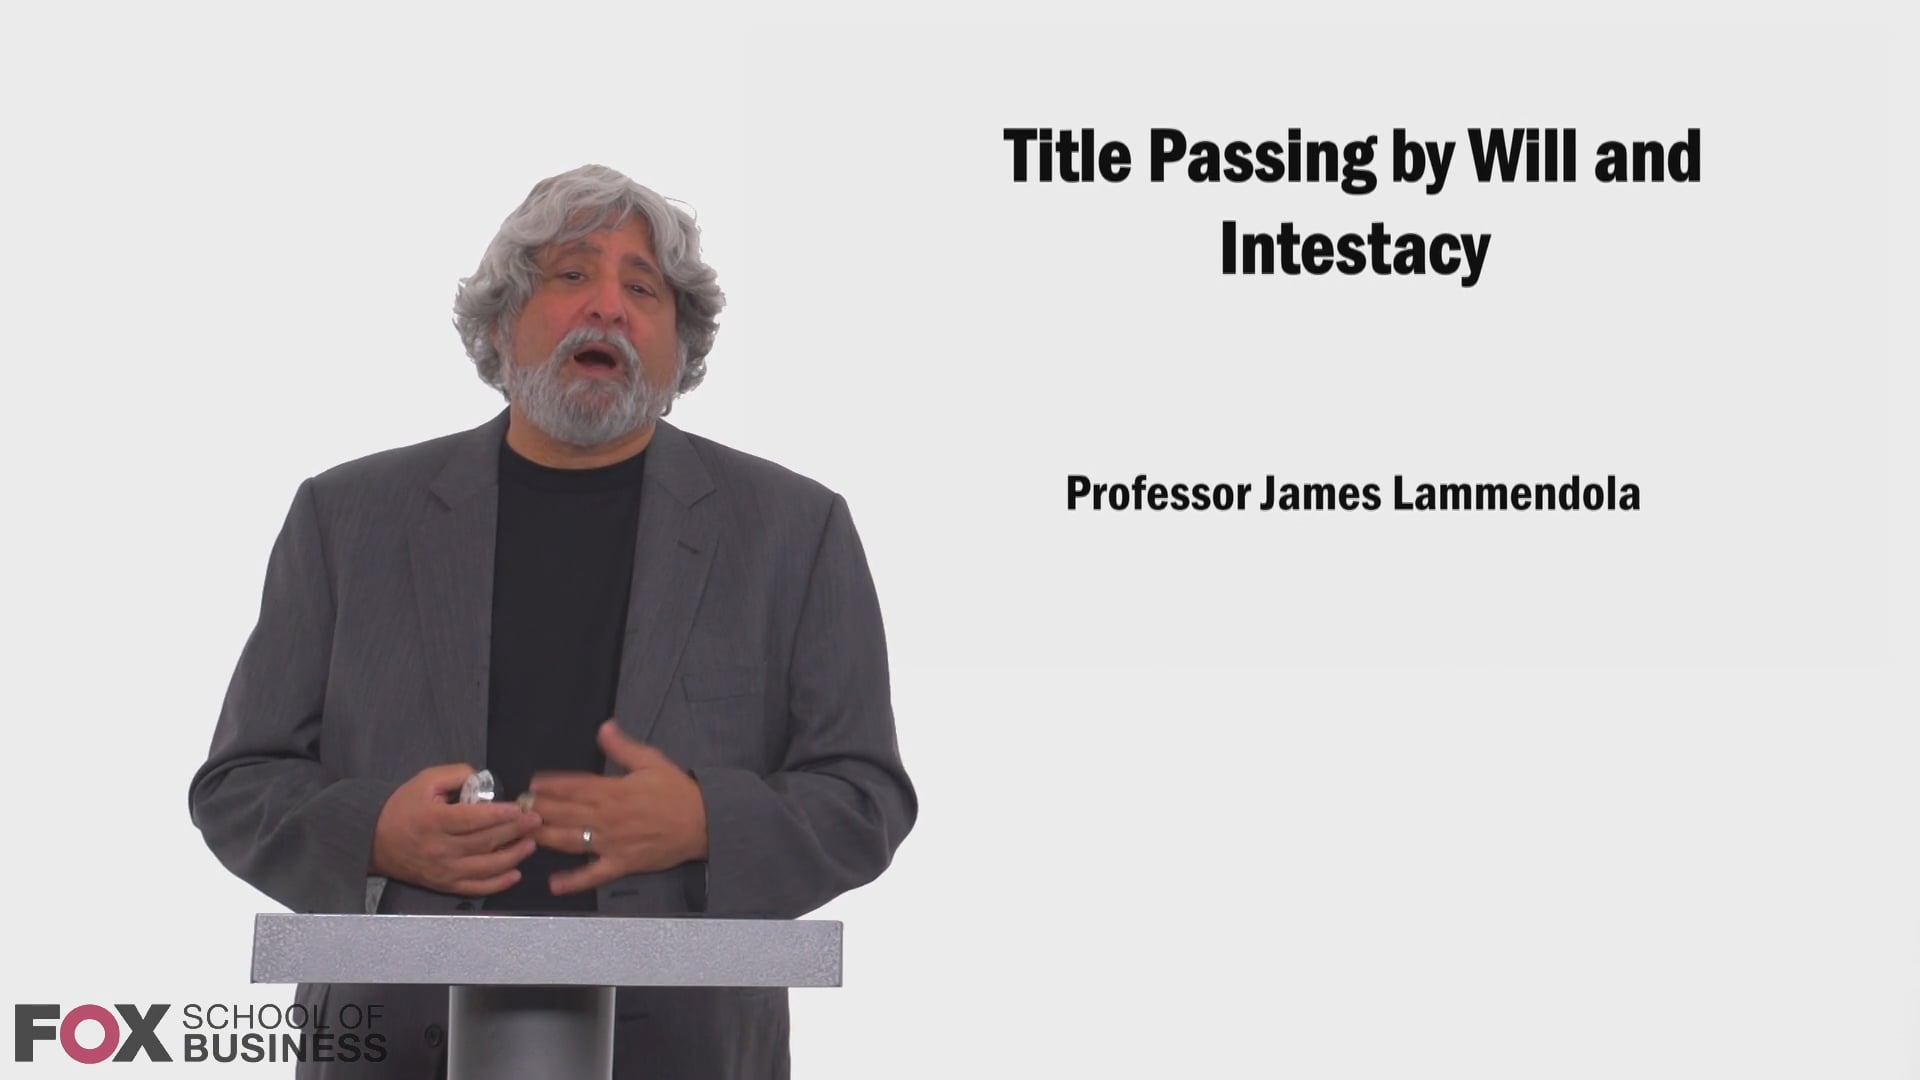 Title Passing by Will and Intestacy